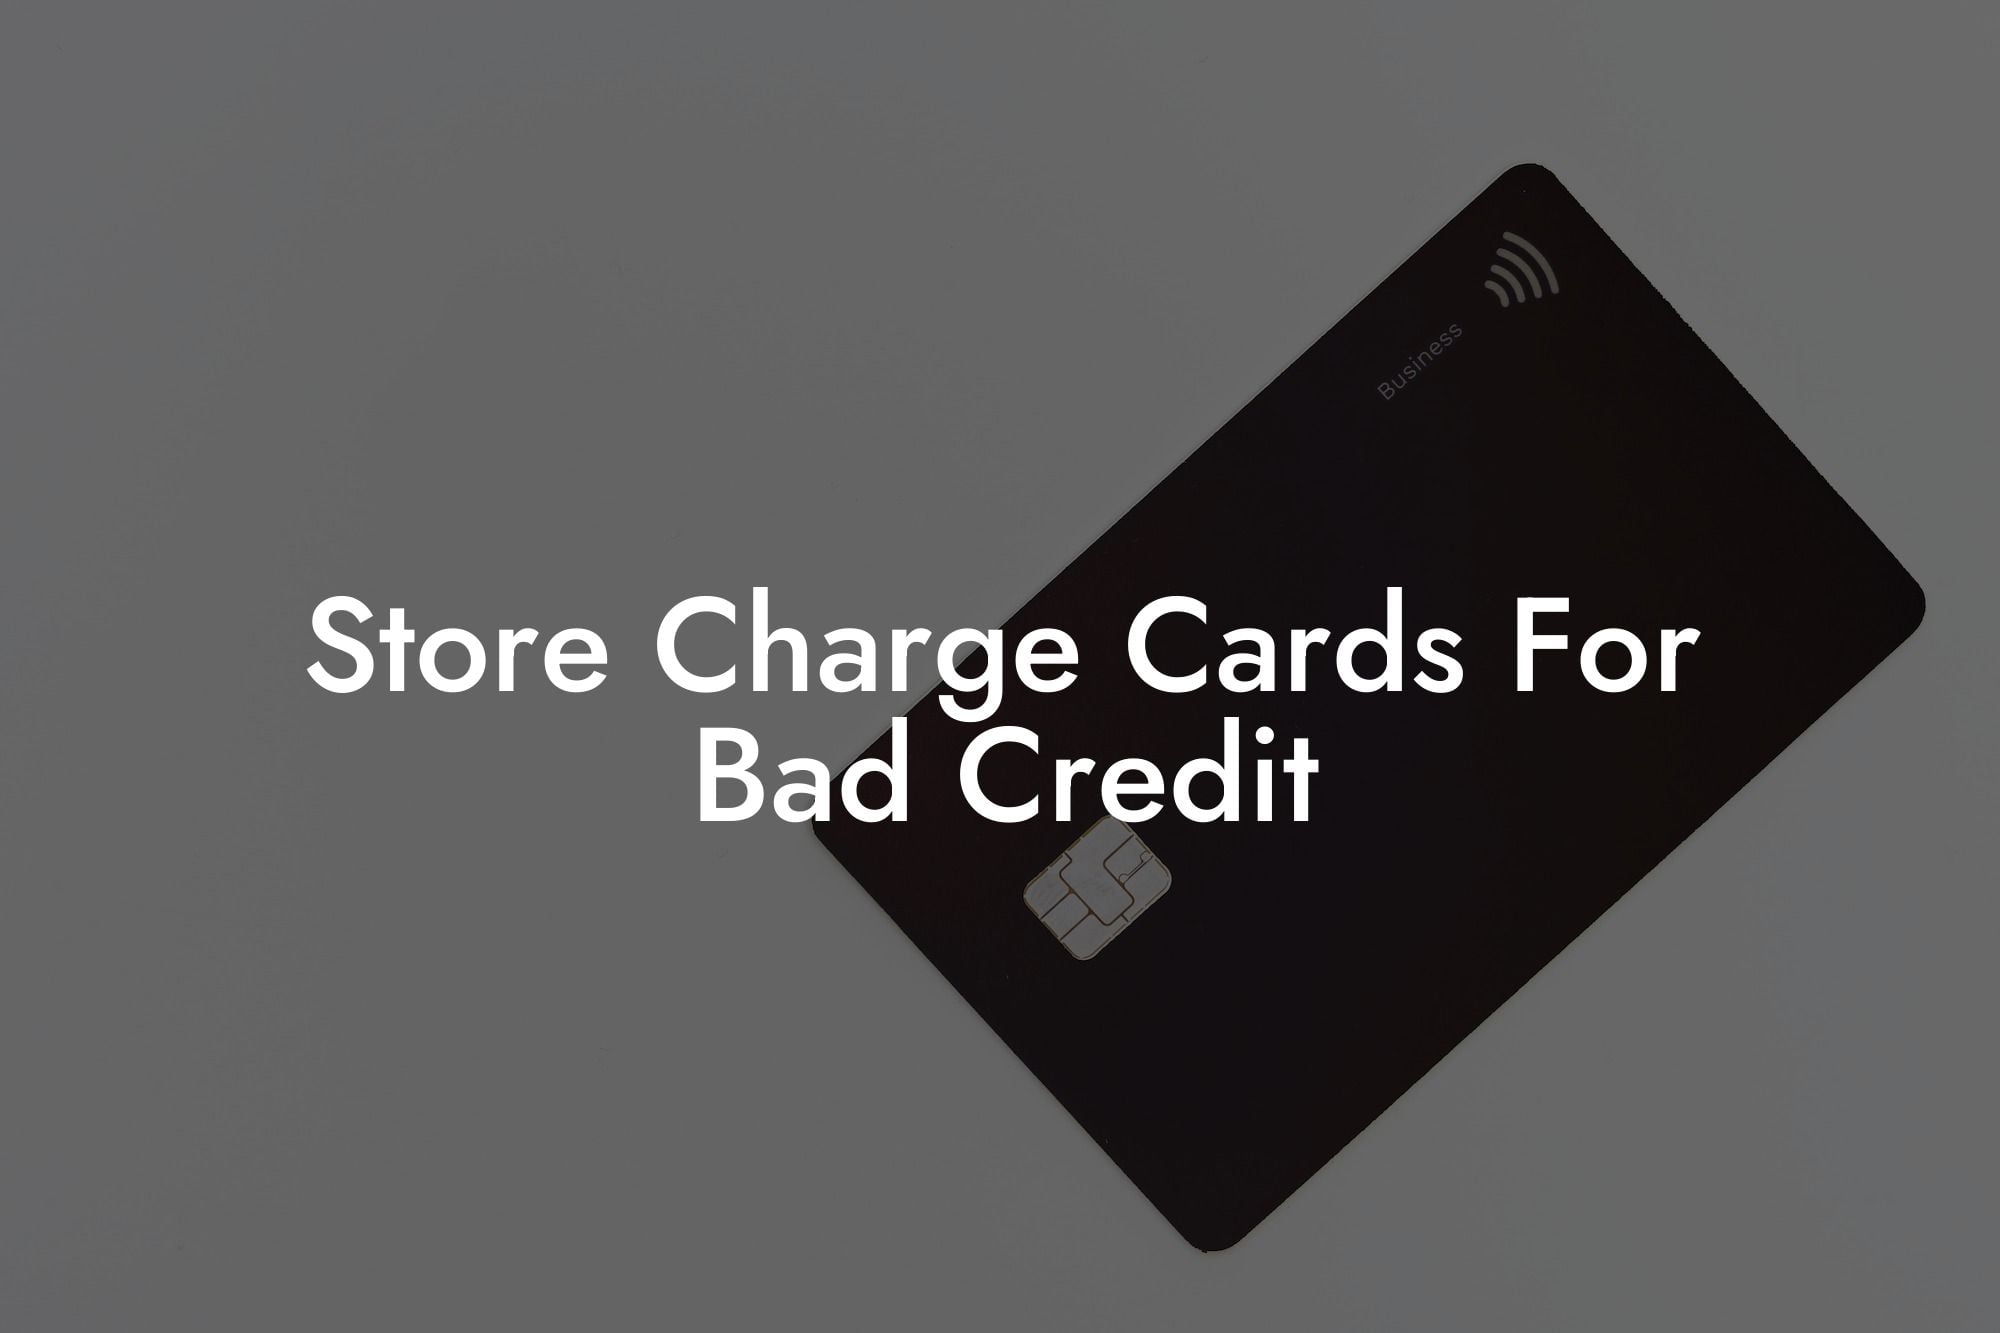 Store Charge Cards For Bad Credit